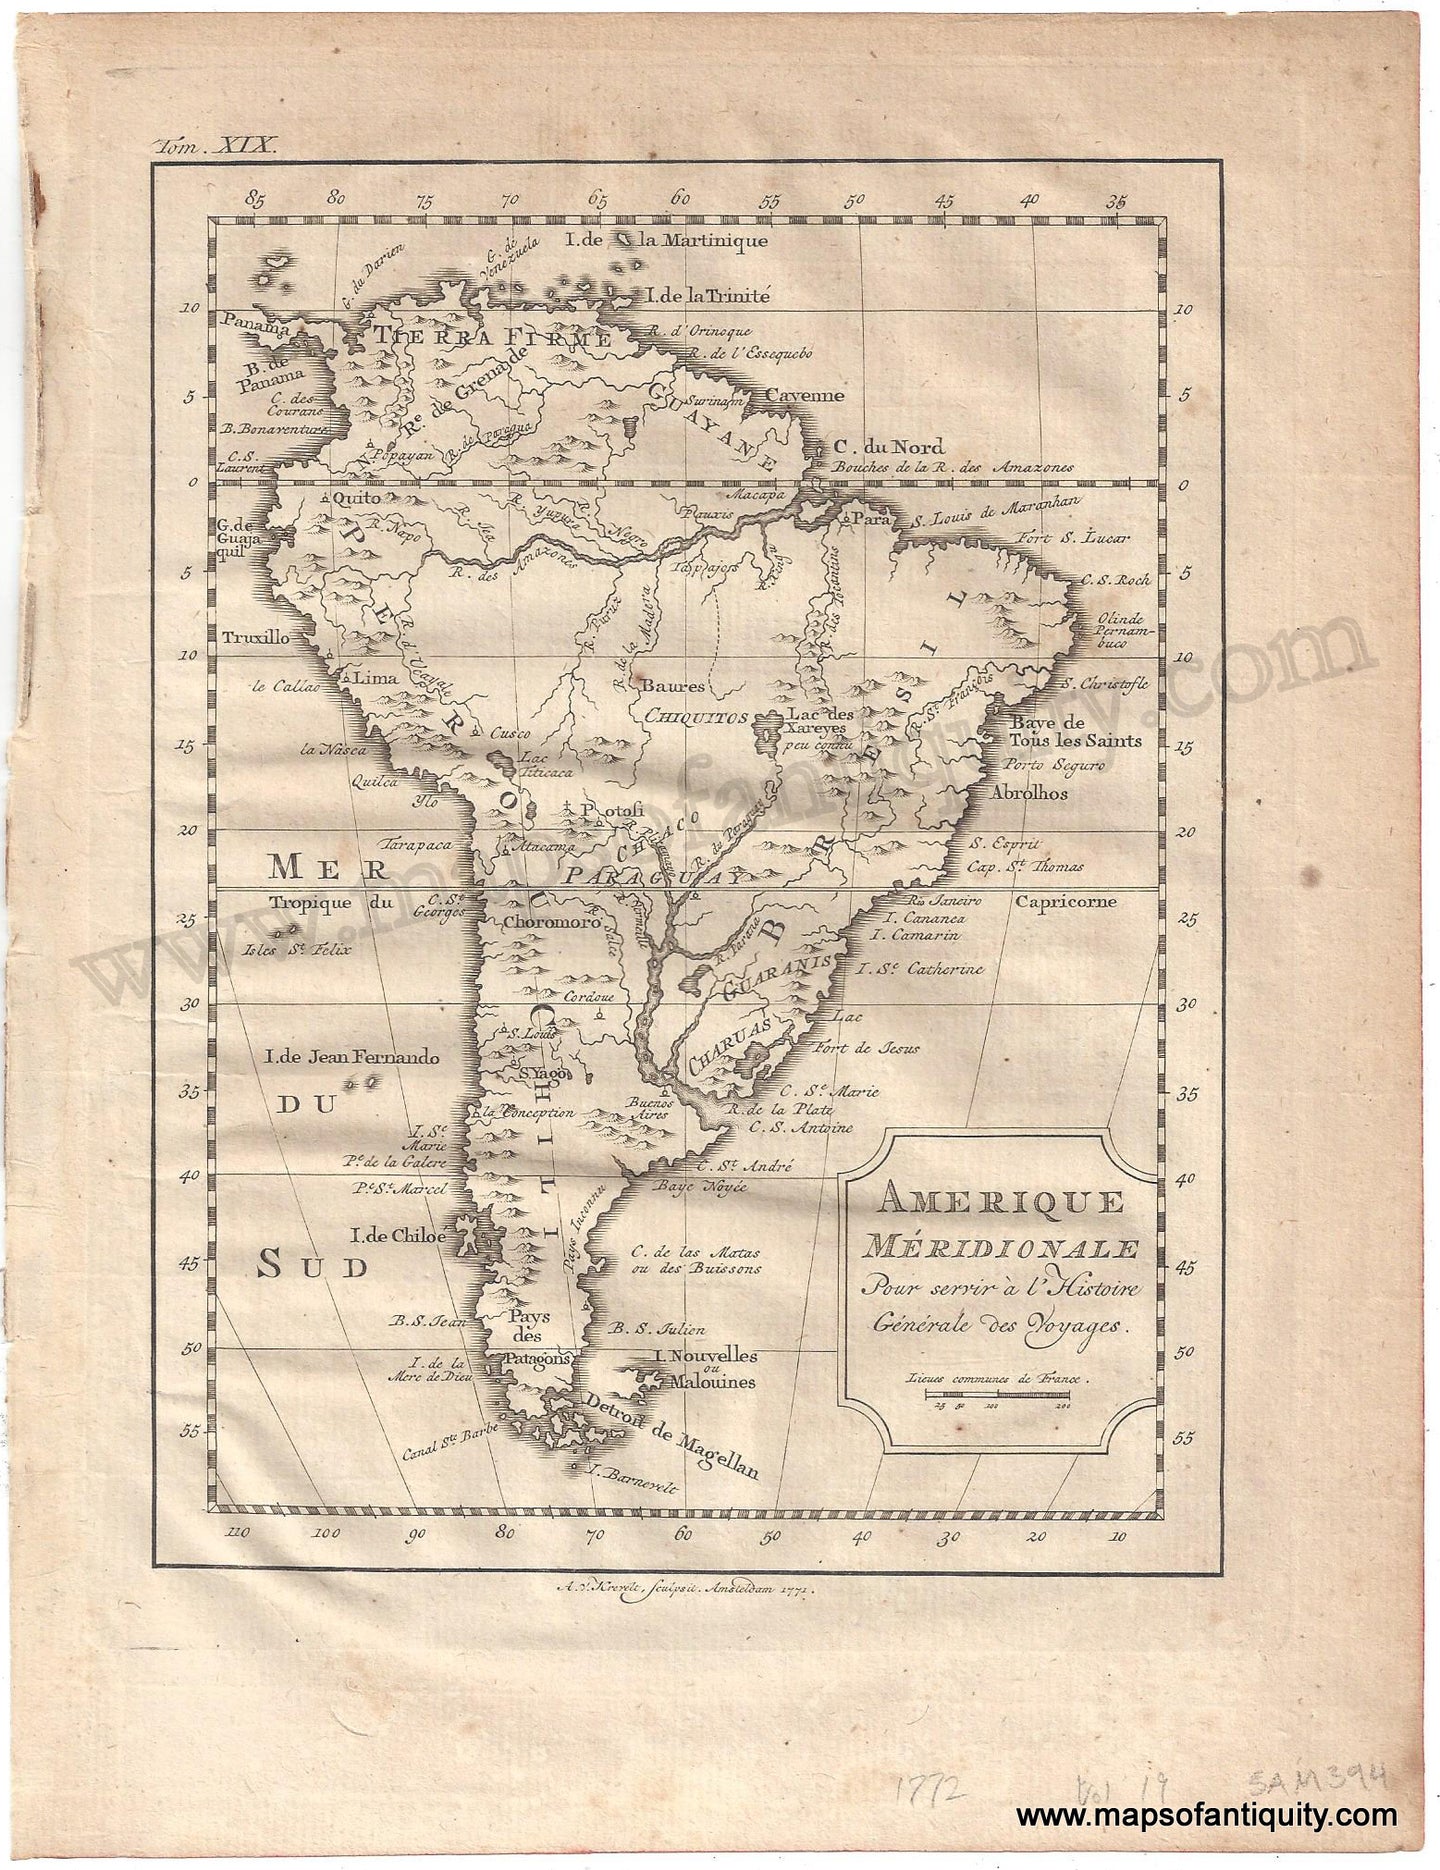 Antique-Uncolored-Map-South-America-Amerique-Meridionale-1772-Bellin--1800s-19th-century-Maps-of-Antiquity